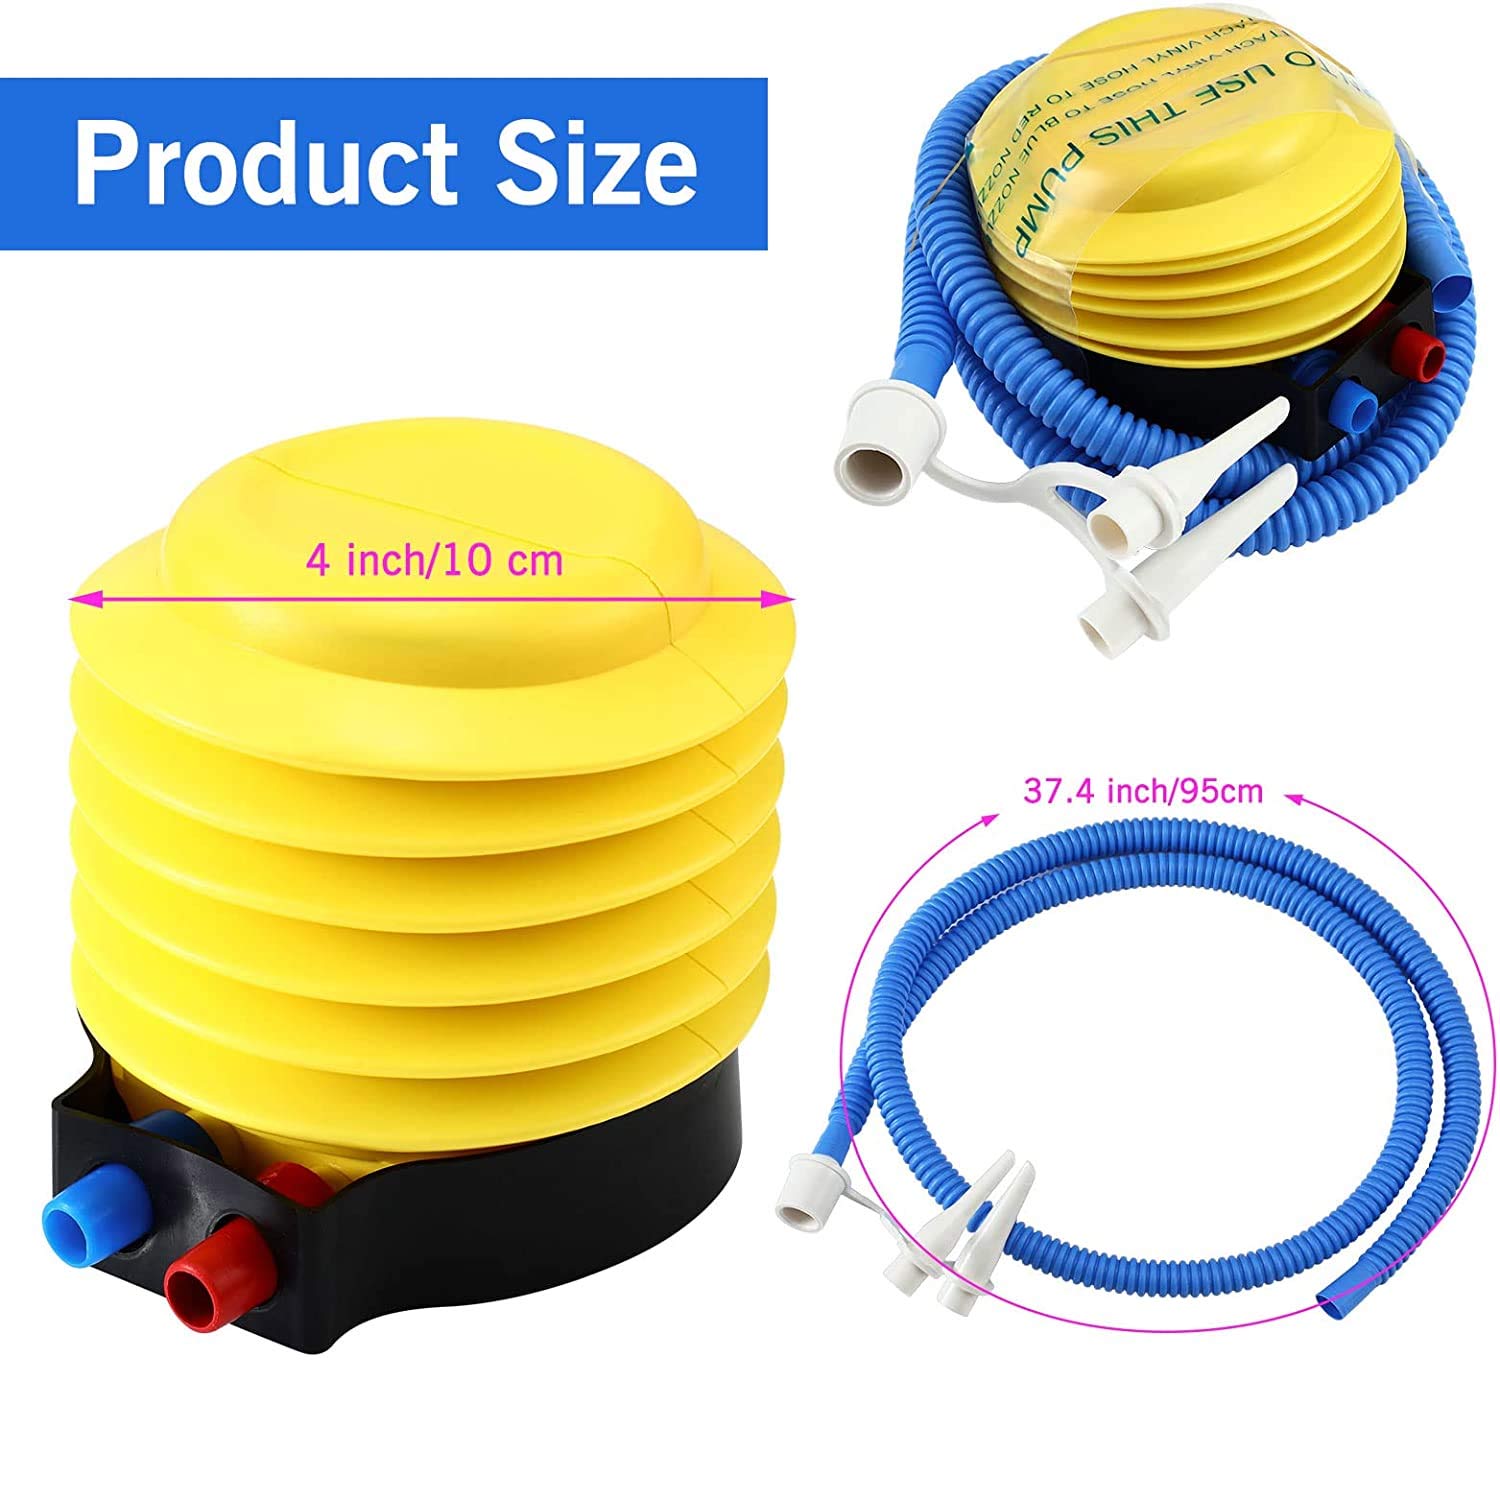 Electric Air Pump Inflator/Deflator For Airbeds Paddling Pools & Toys